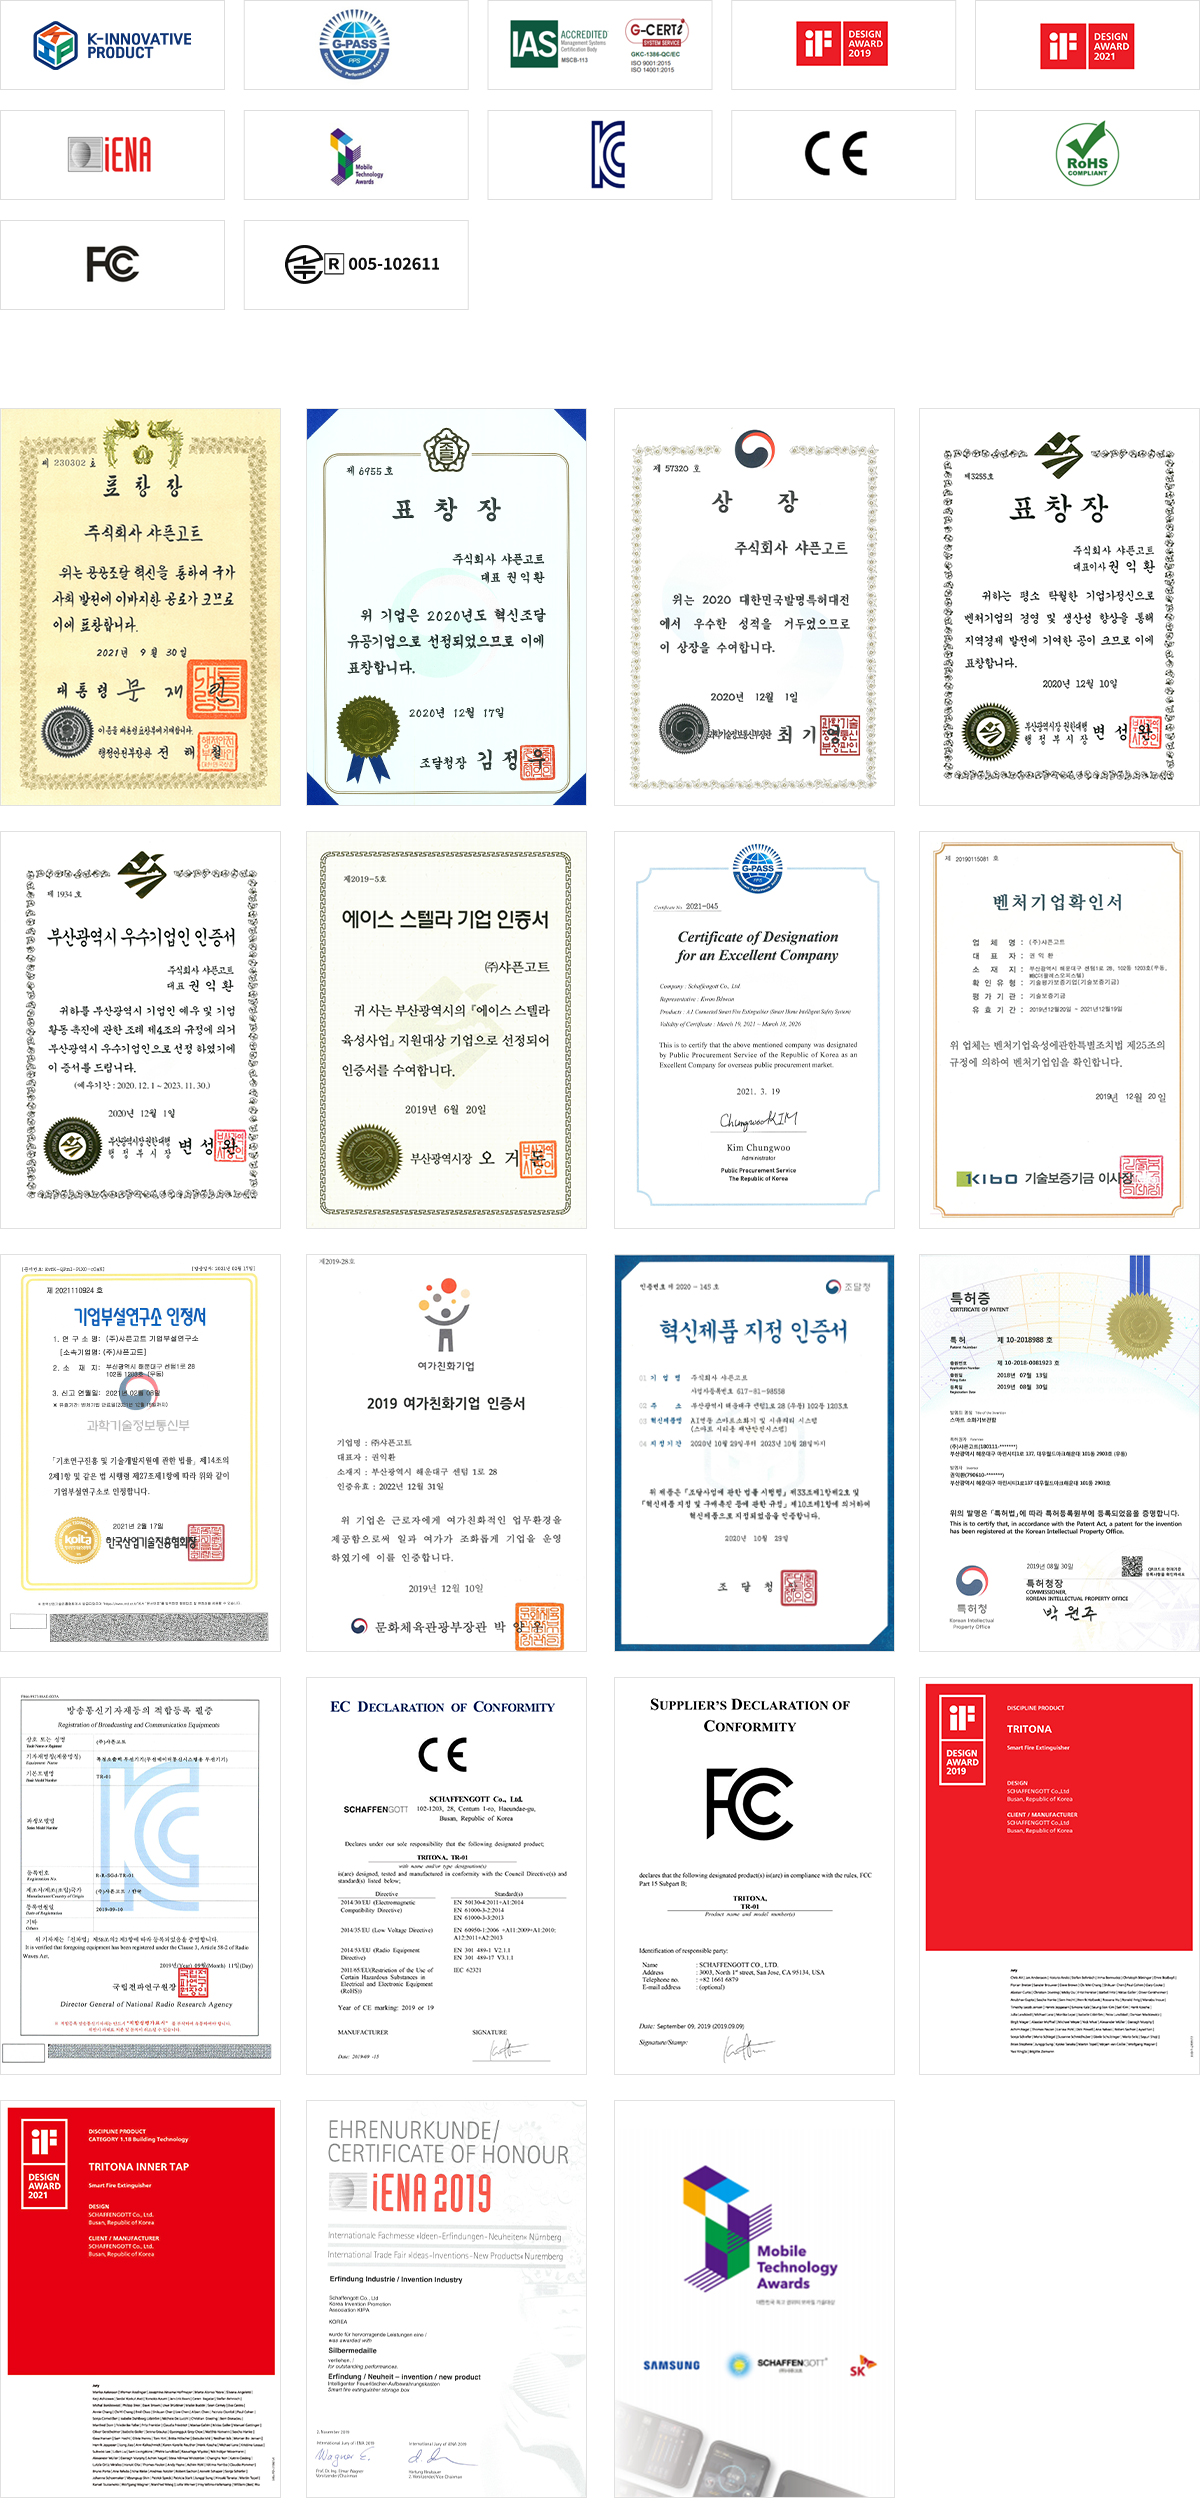 Awards and Certifications